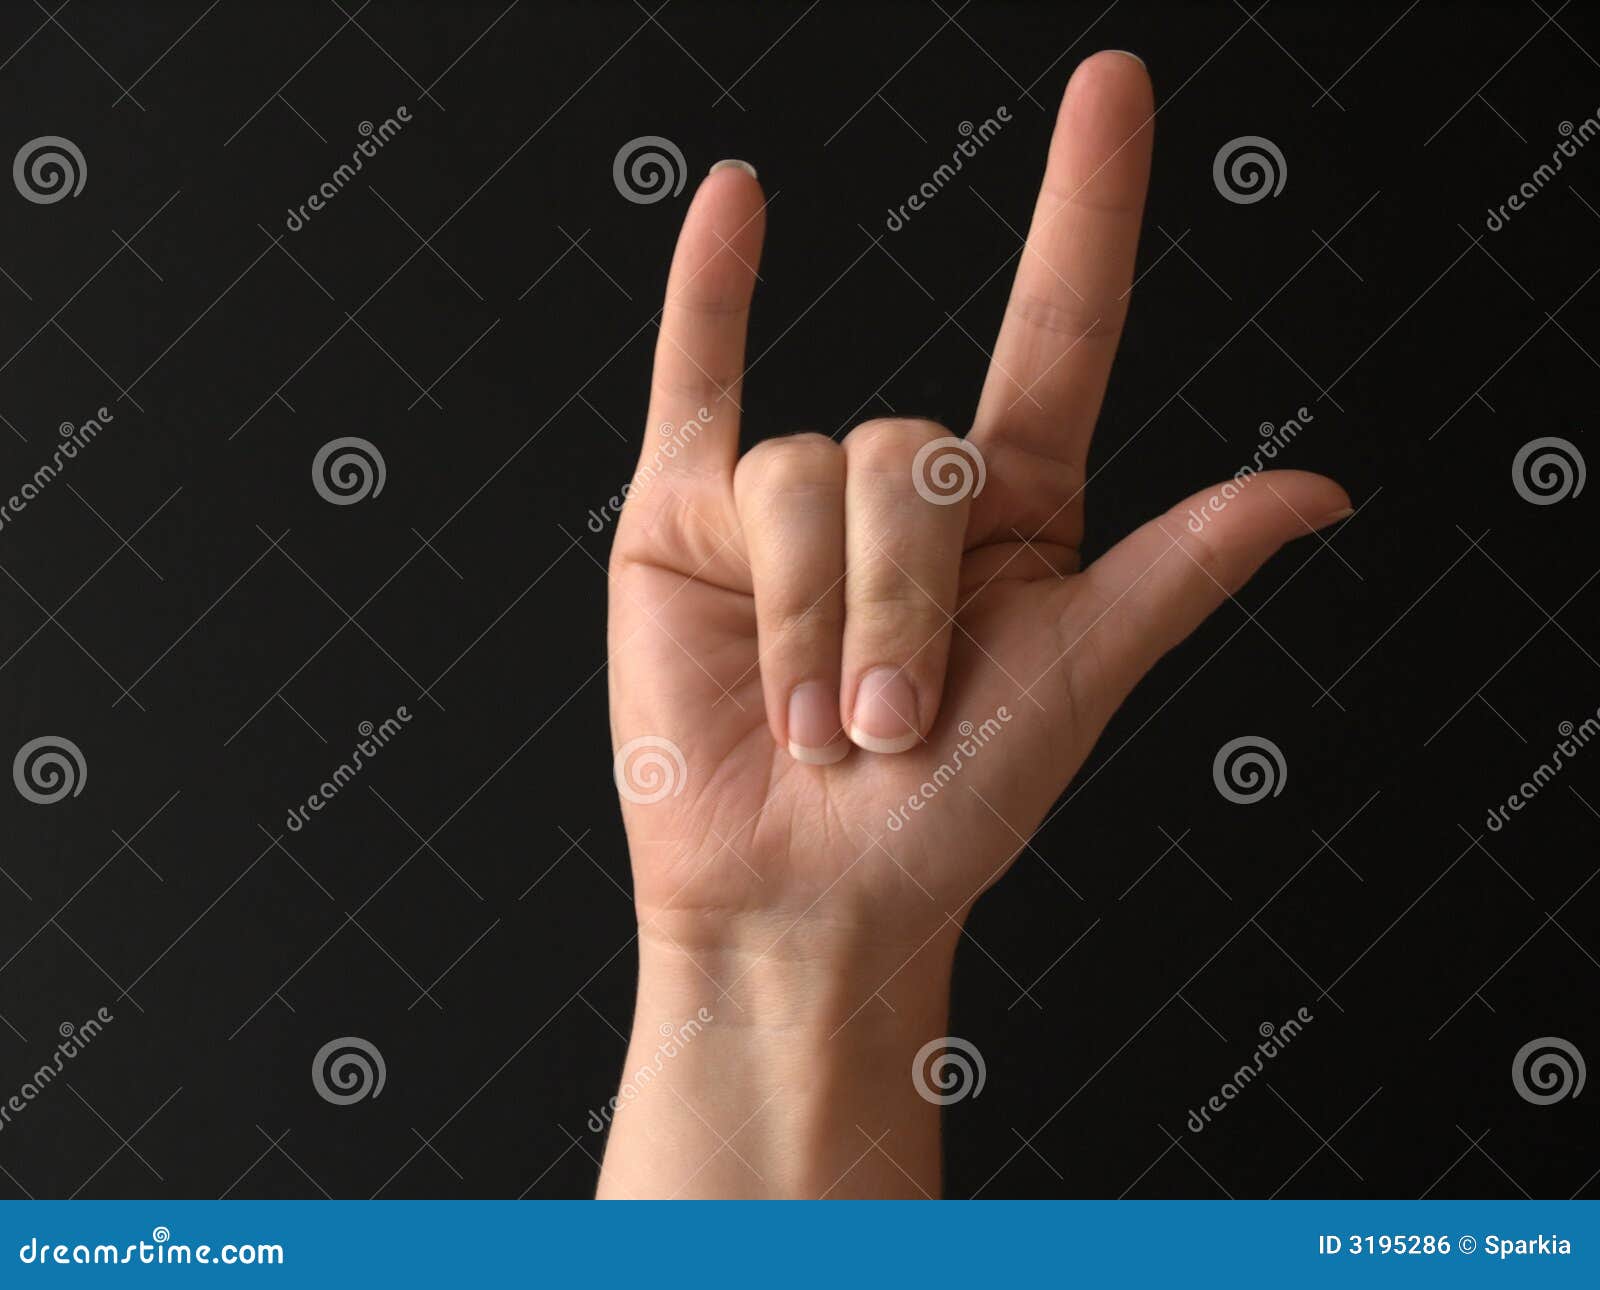 338 Sign Language I Love You Photos Free Royalty Free Stock Photos From Dreamstime